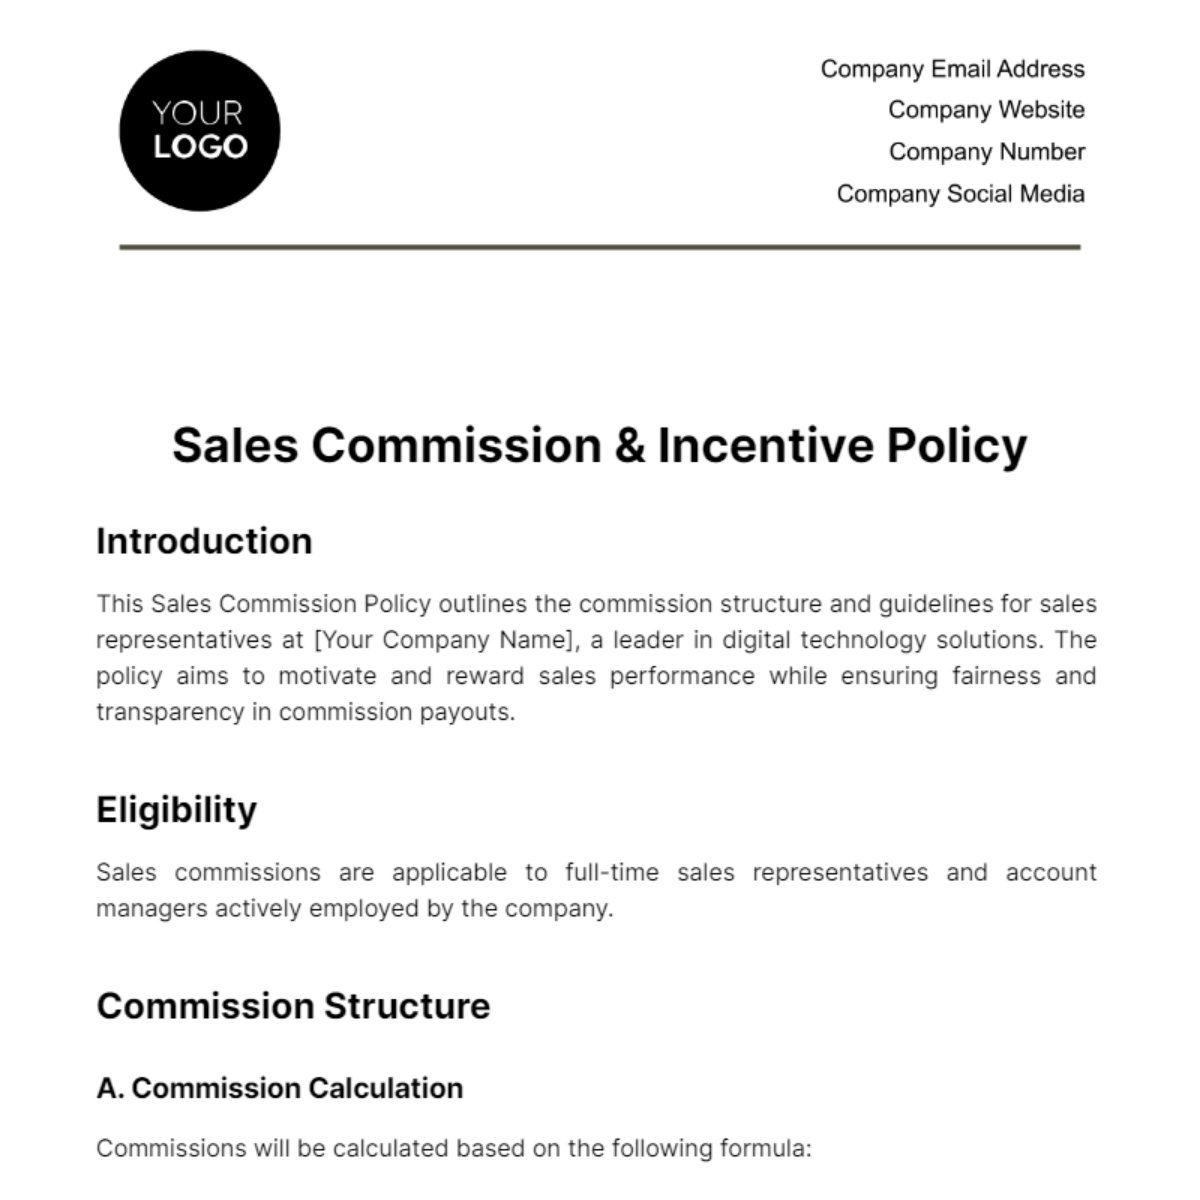 Free Sales Commission & Incentive Policy Template